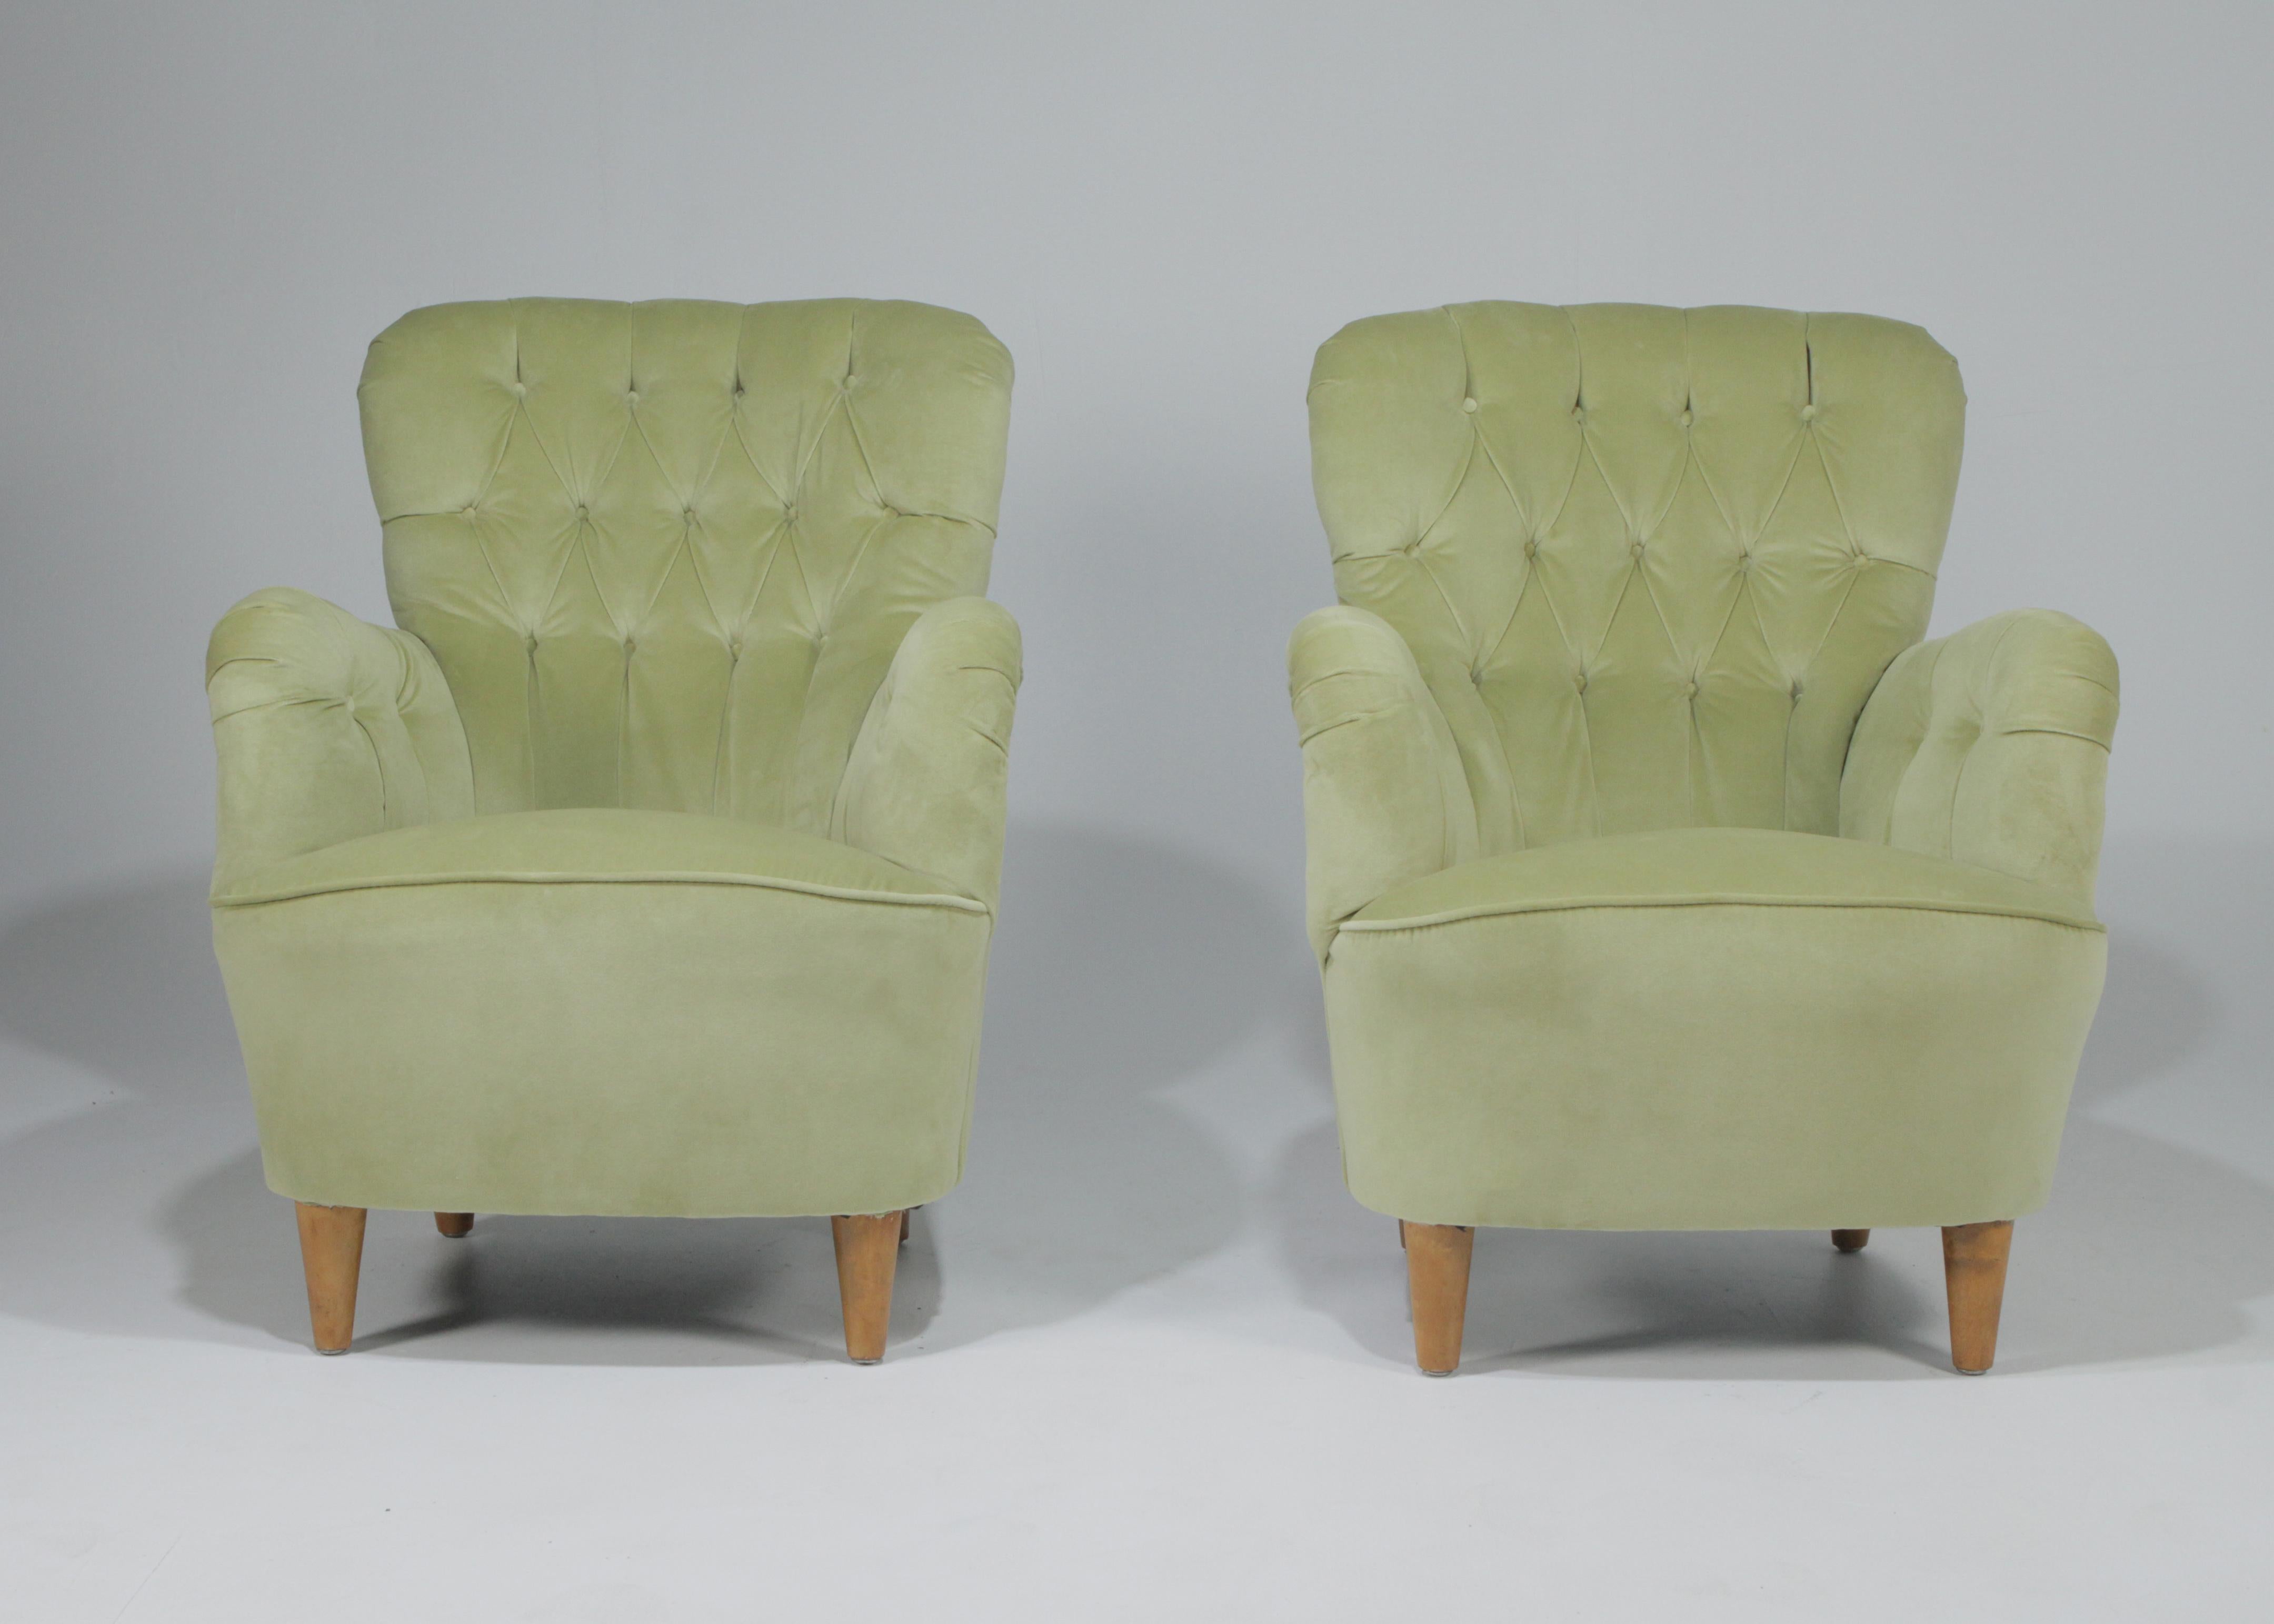 Yummy pistachio ice cream light green velvet club chairs, having new upholstery and tufted inside arms and back. Legs are a light wood, also newly refinished.
Stunning designer style. 

Measures: Seat height 17
Seat depth 19
Inside seat width 17.
 